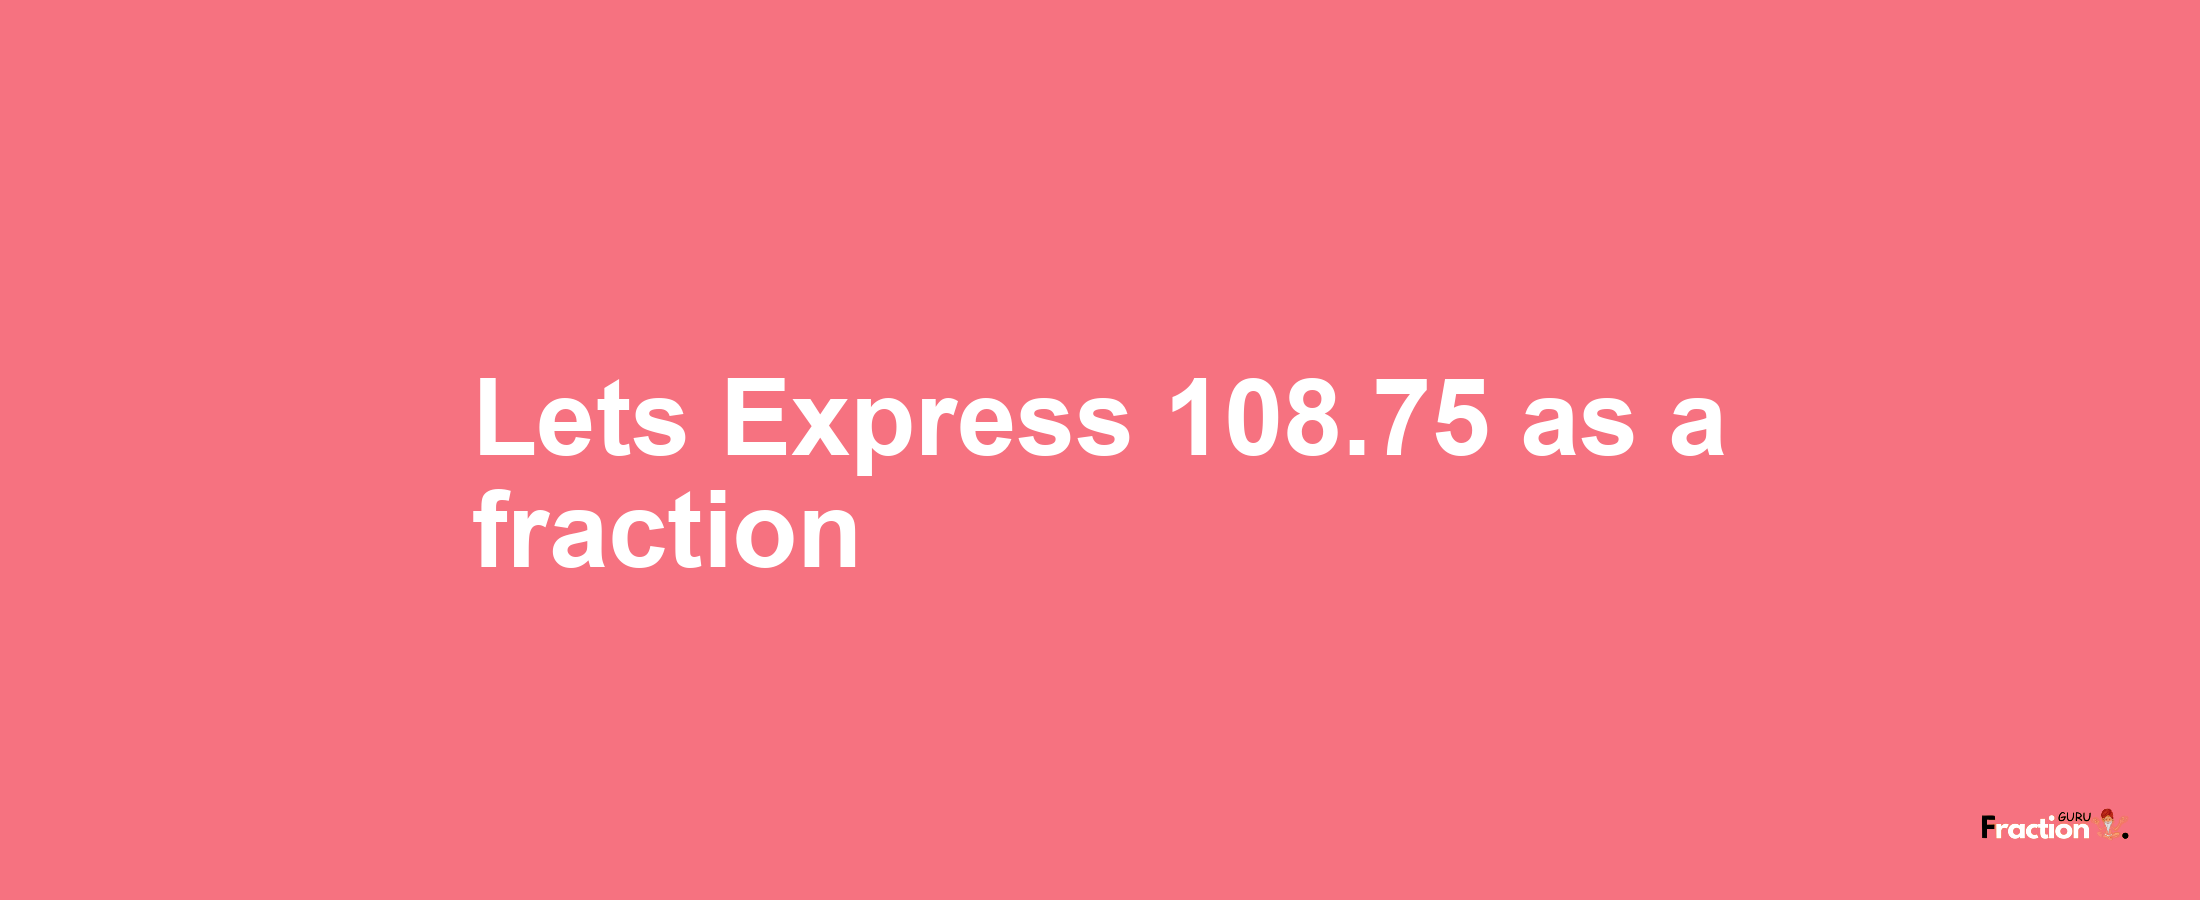 Lets Express 108.75 as afraction